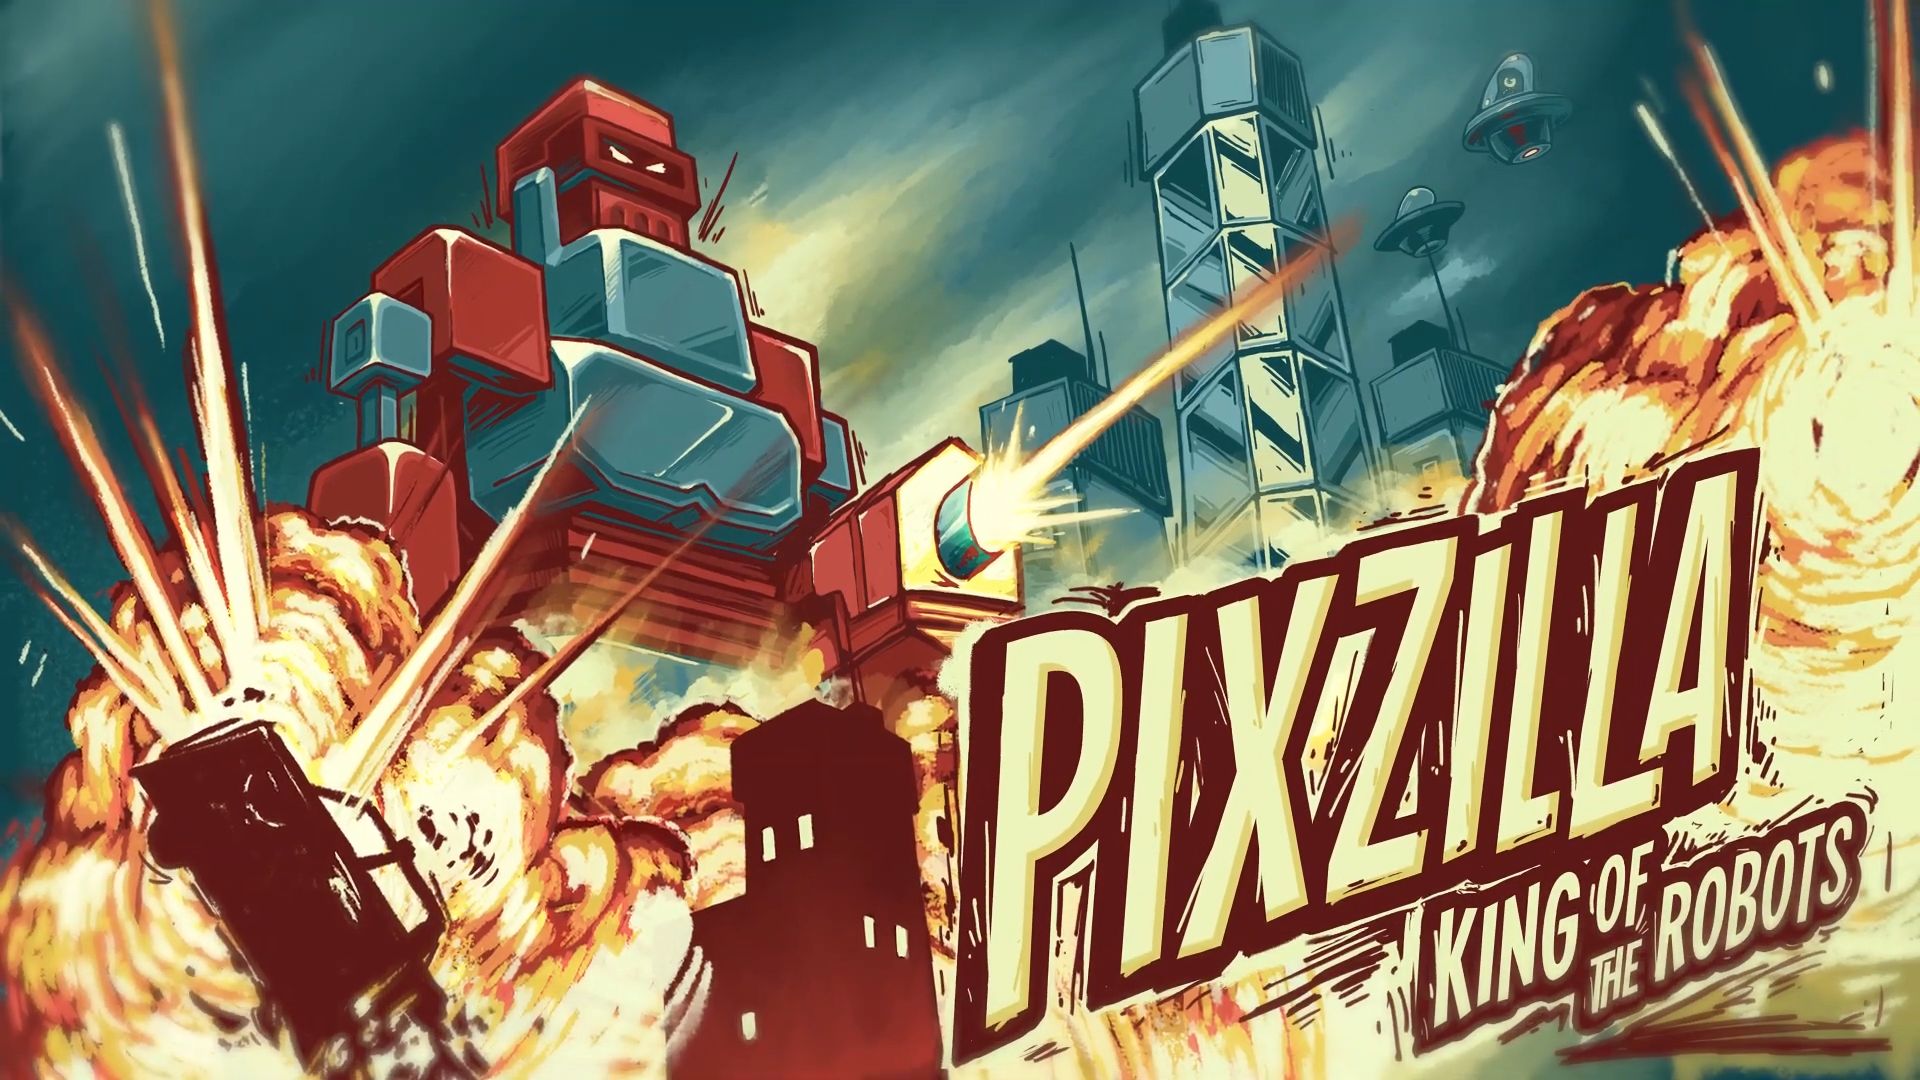 Full version of Android Run &#x27;N Gun game apk Pixzilla / King of the Robots for tablet and phone.